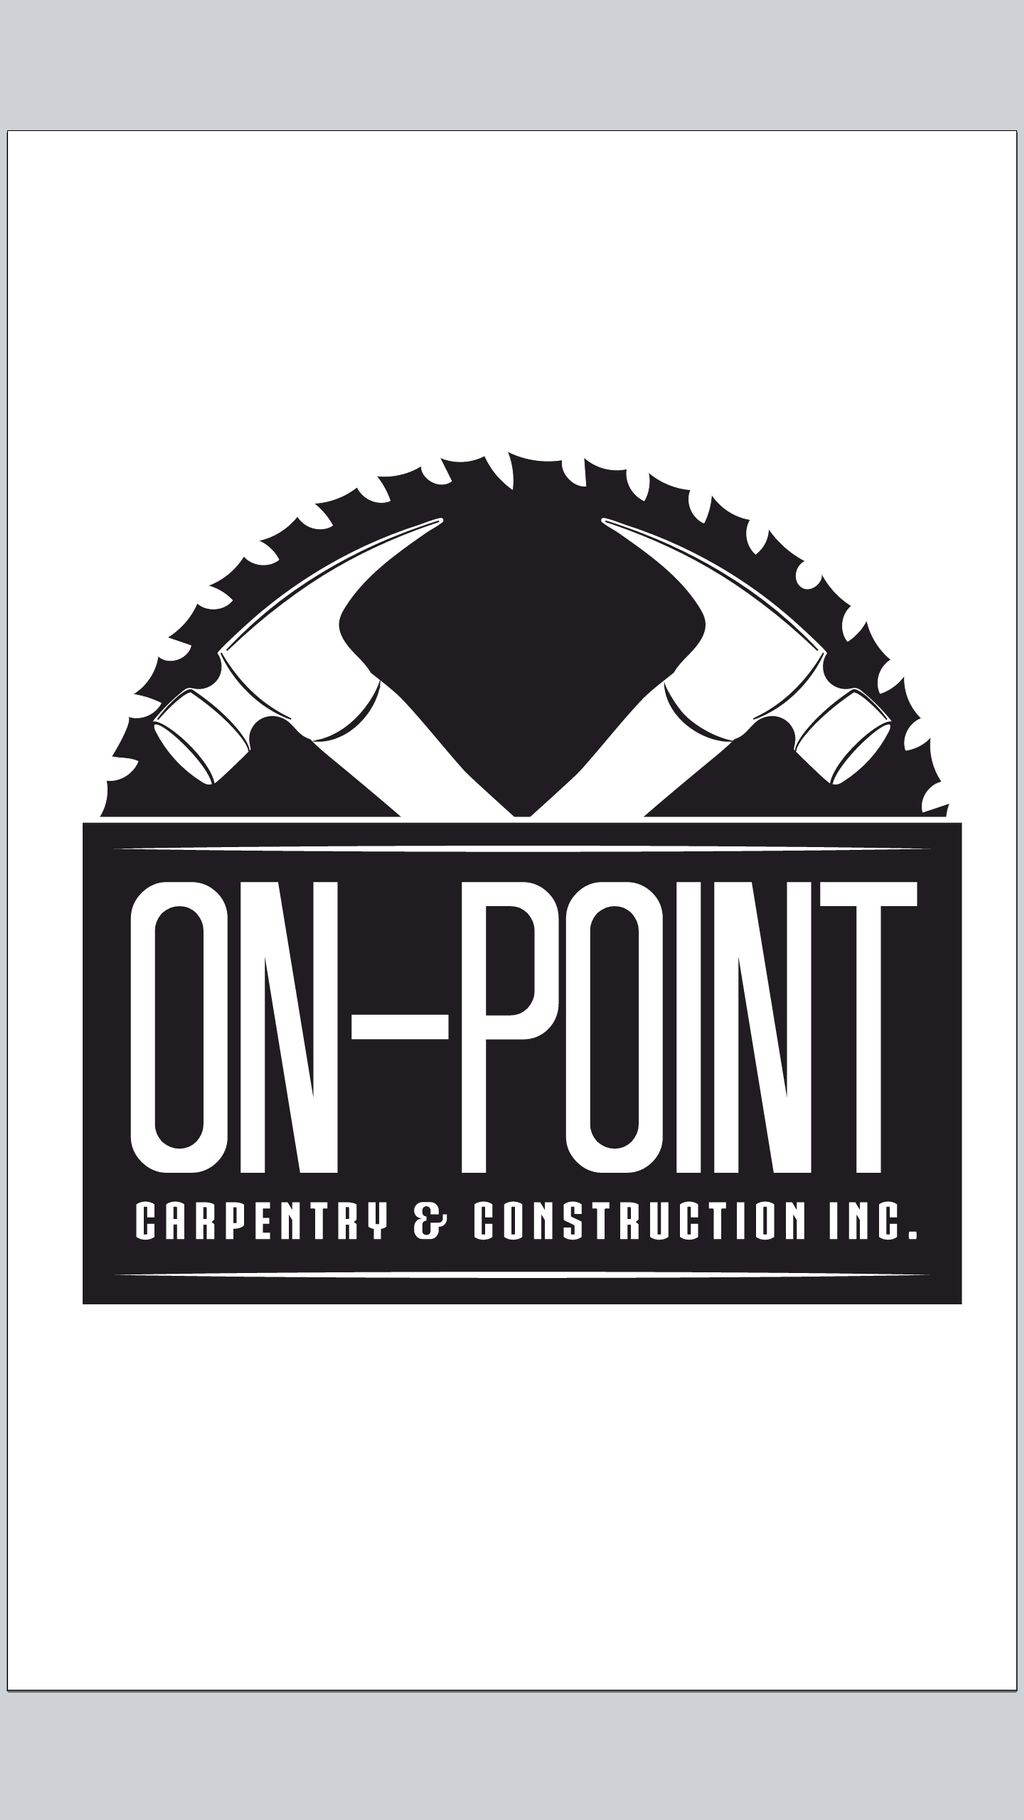 On-Point Carpentry & Construction